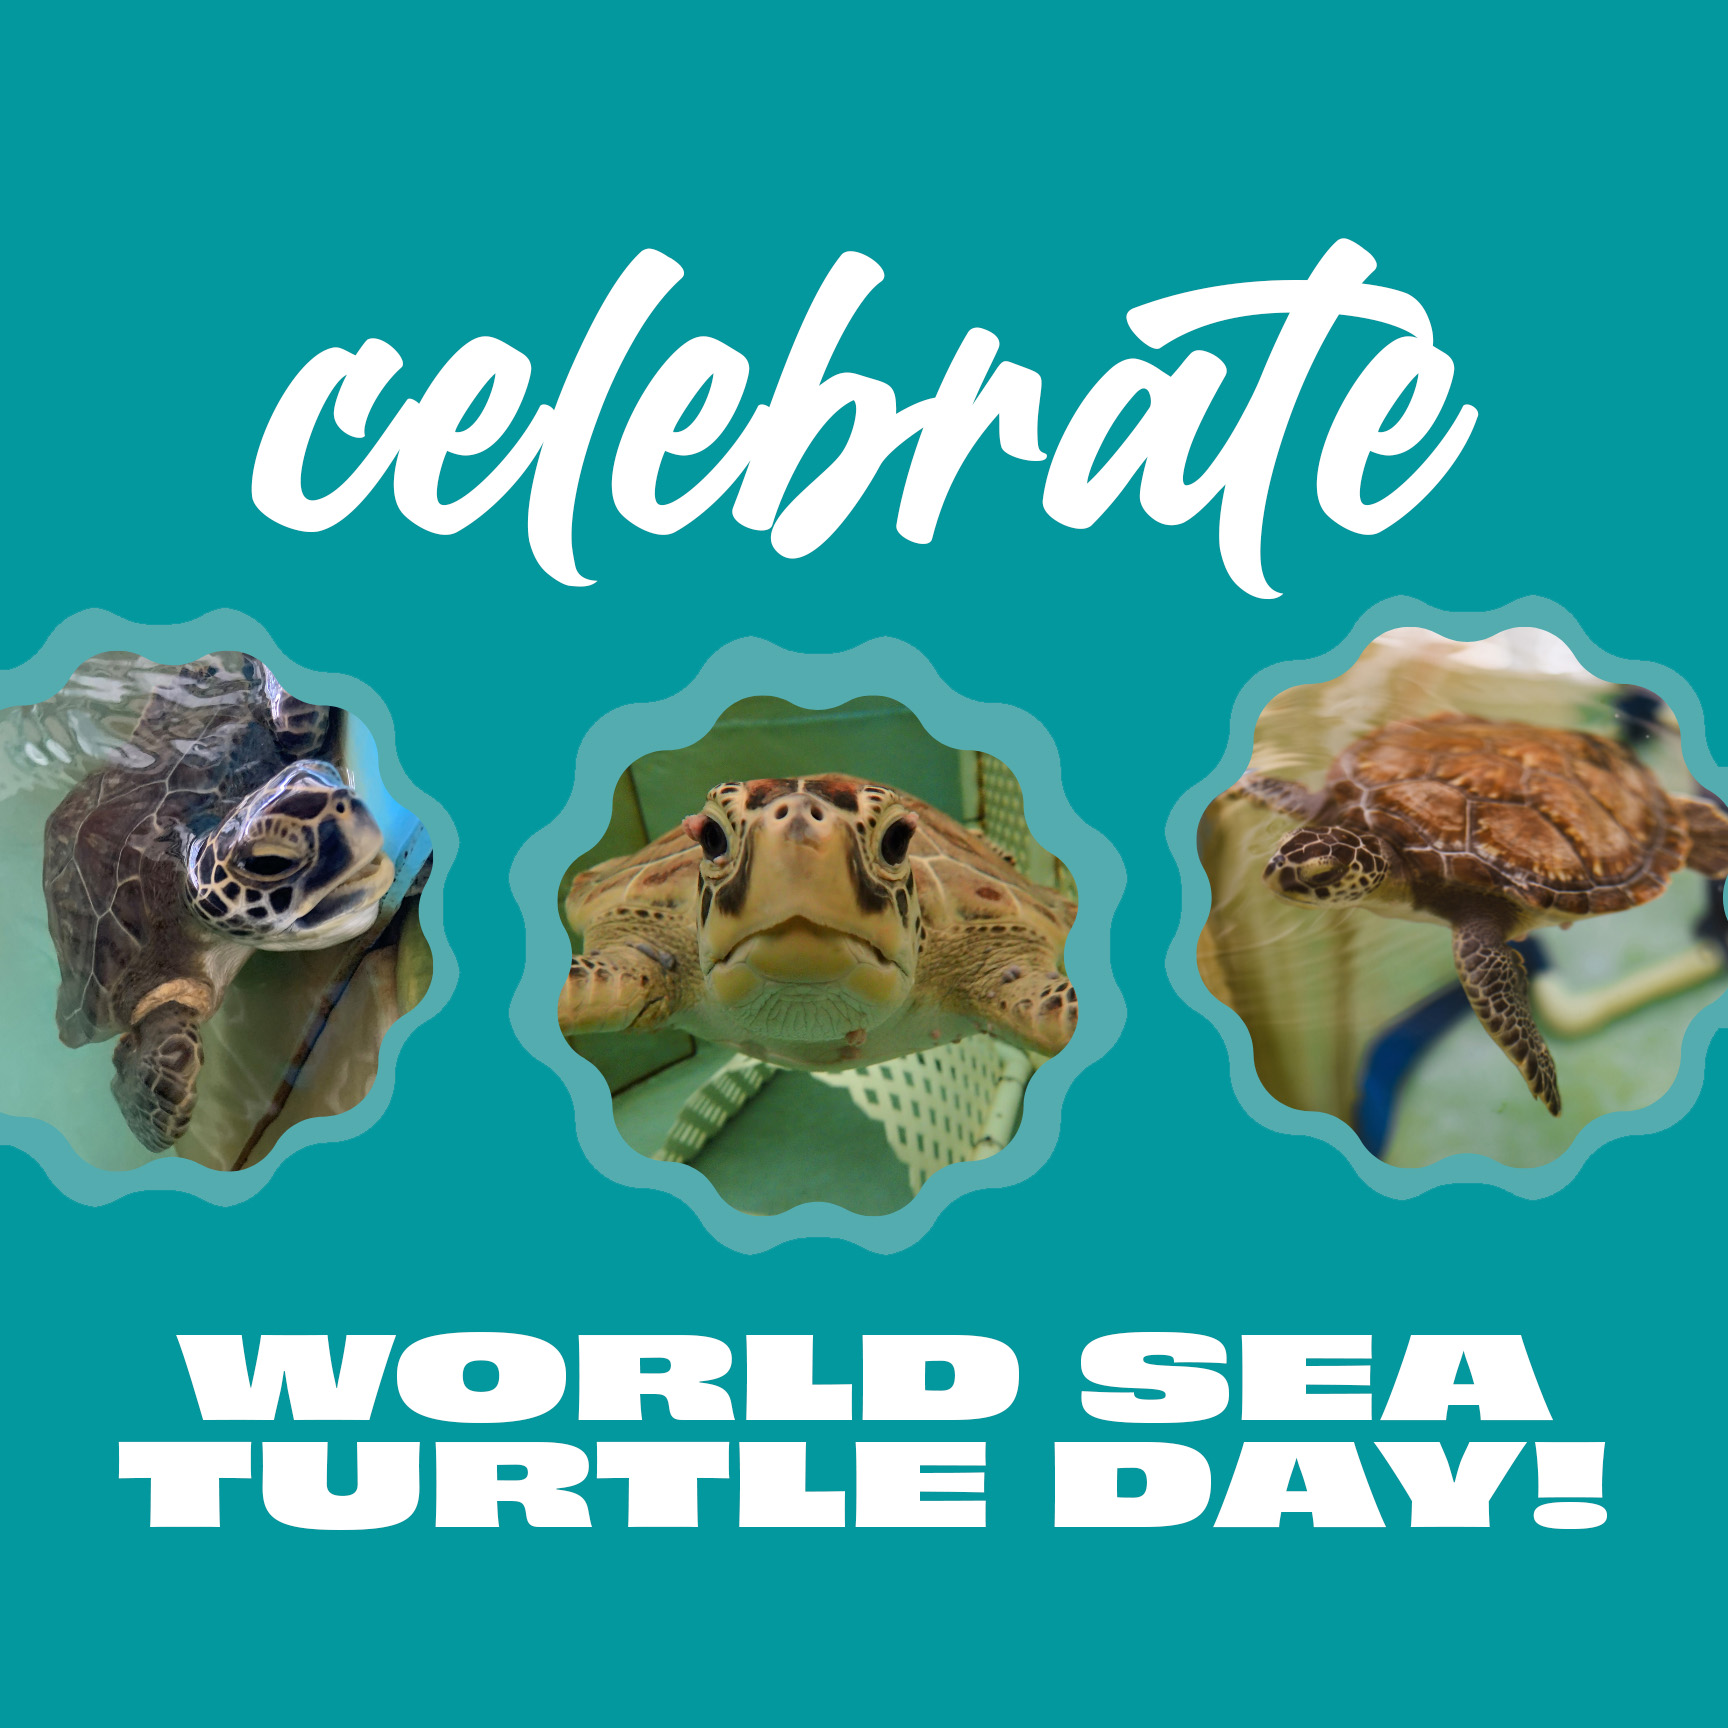 Join us June 17 to Celebrate World Sea Turtle Day! 